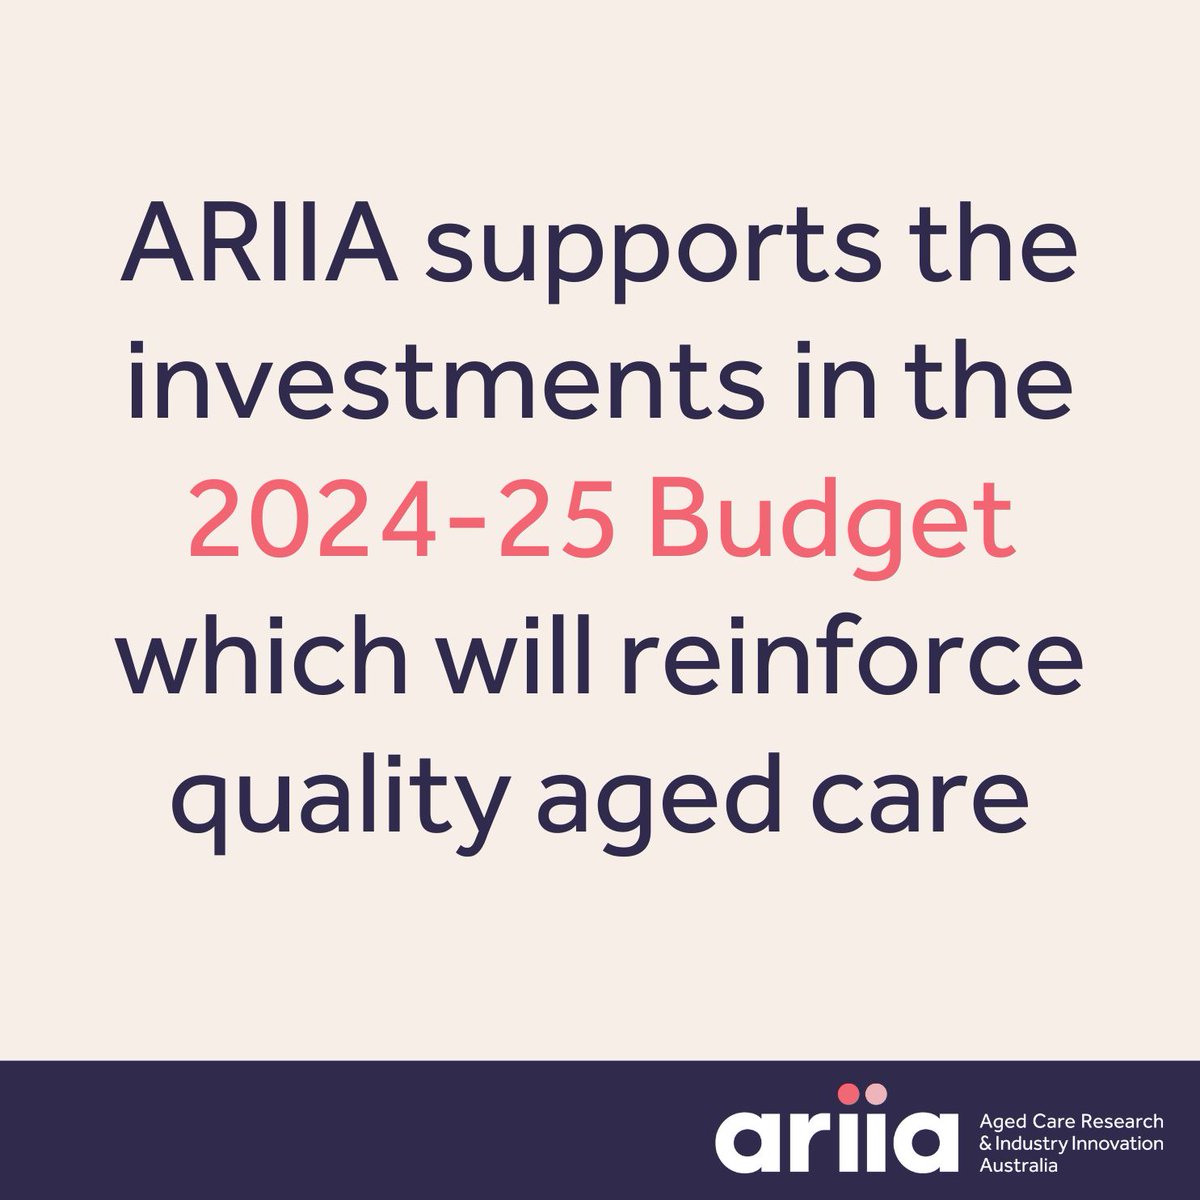 ARIIA supports the investments in the #FederalBudget2024 which will reinforce the foundations and connections that underpin quality #agedcare, including commitments to more #homecarepackages, more #workforce support, and stronger links between aged care and the health system.